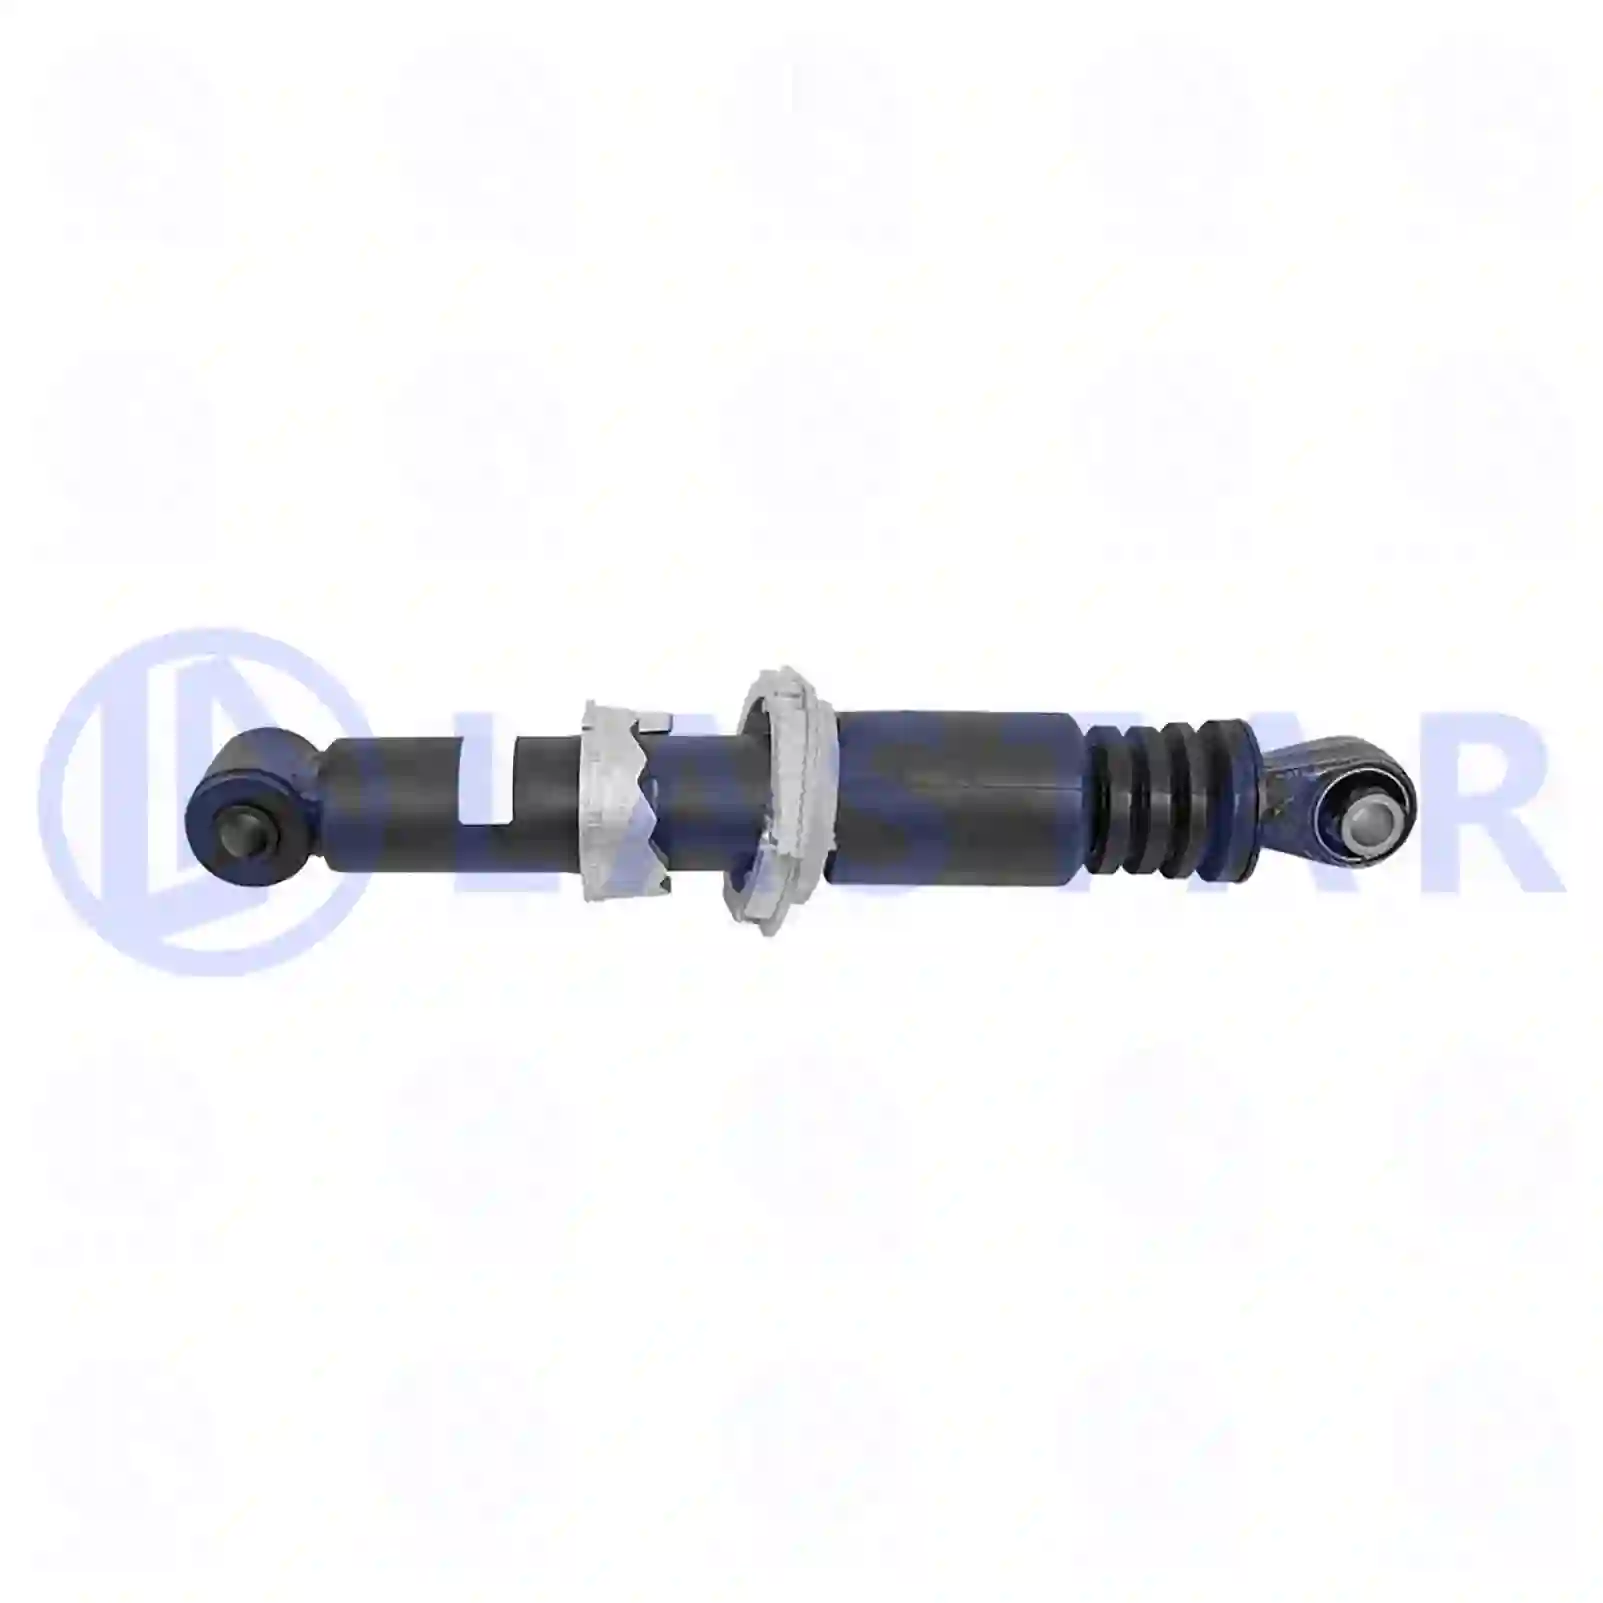 Cabin shock absorber, 77735782, 21171973, , , ||  77735782 Lastar Spare Part | Truck Spare Parts, Auotomotive Spare Parts Cabin shock absorber, 77735782, 21171973, , , ||  77735782 Lastar Spare Part | Truck Spare Parts, Auotomotive Spare Parts